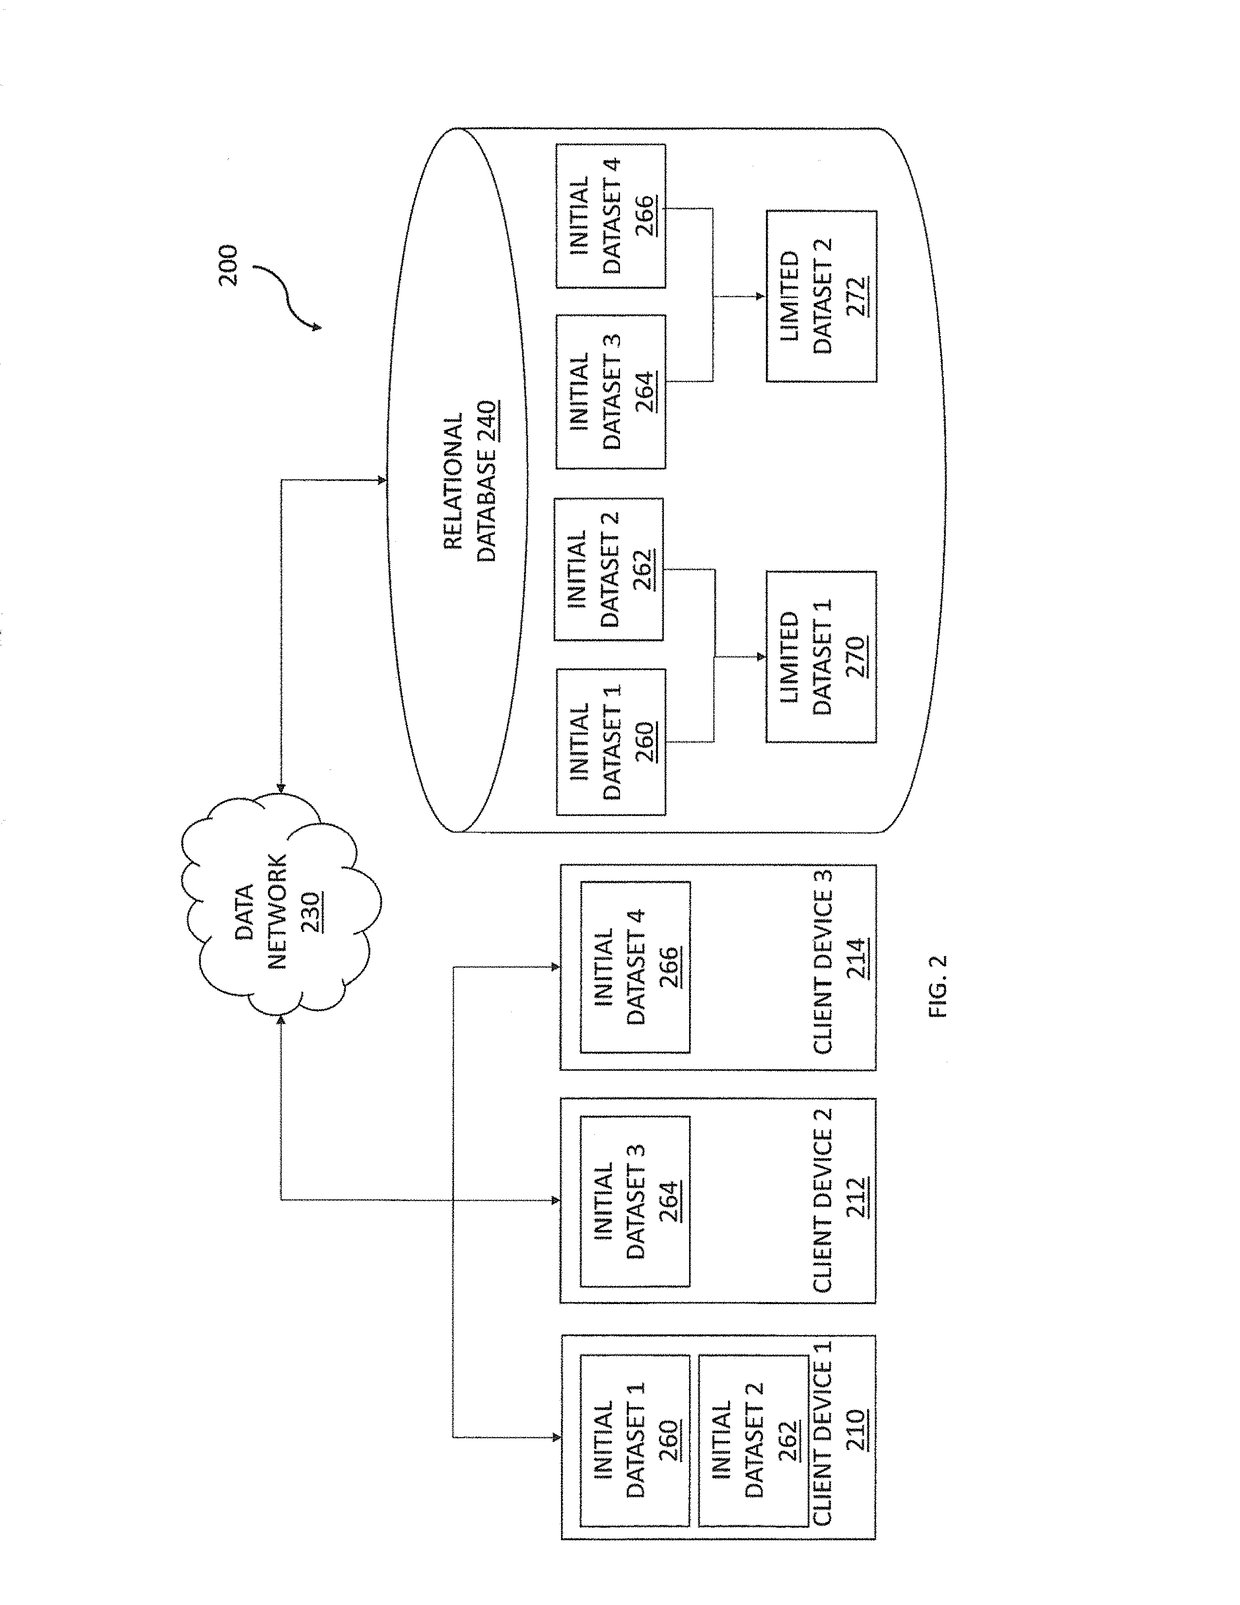 Methods and systems for selectively retrieving data to provide a limited dataset for incorporation into a pivot table